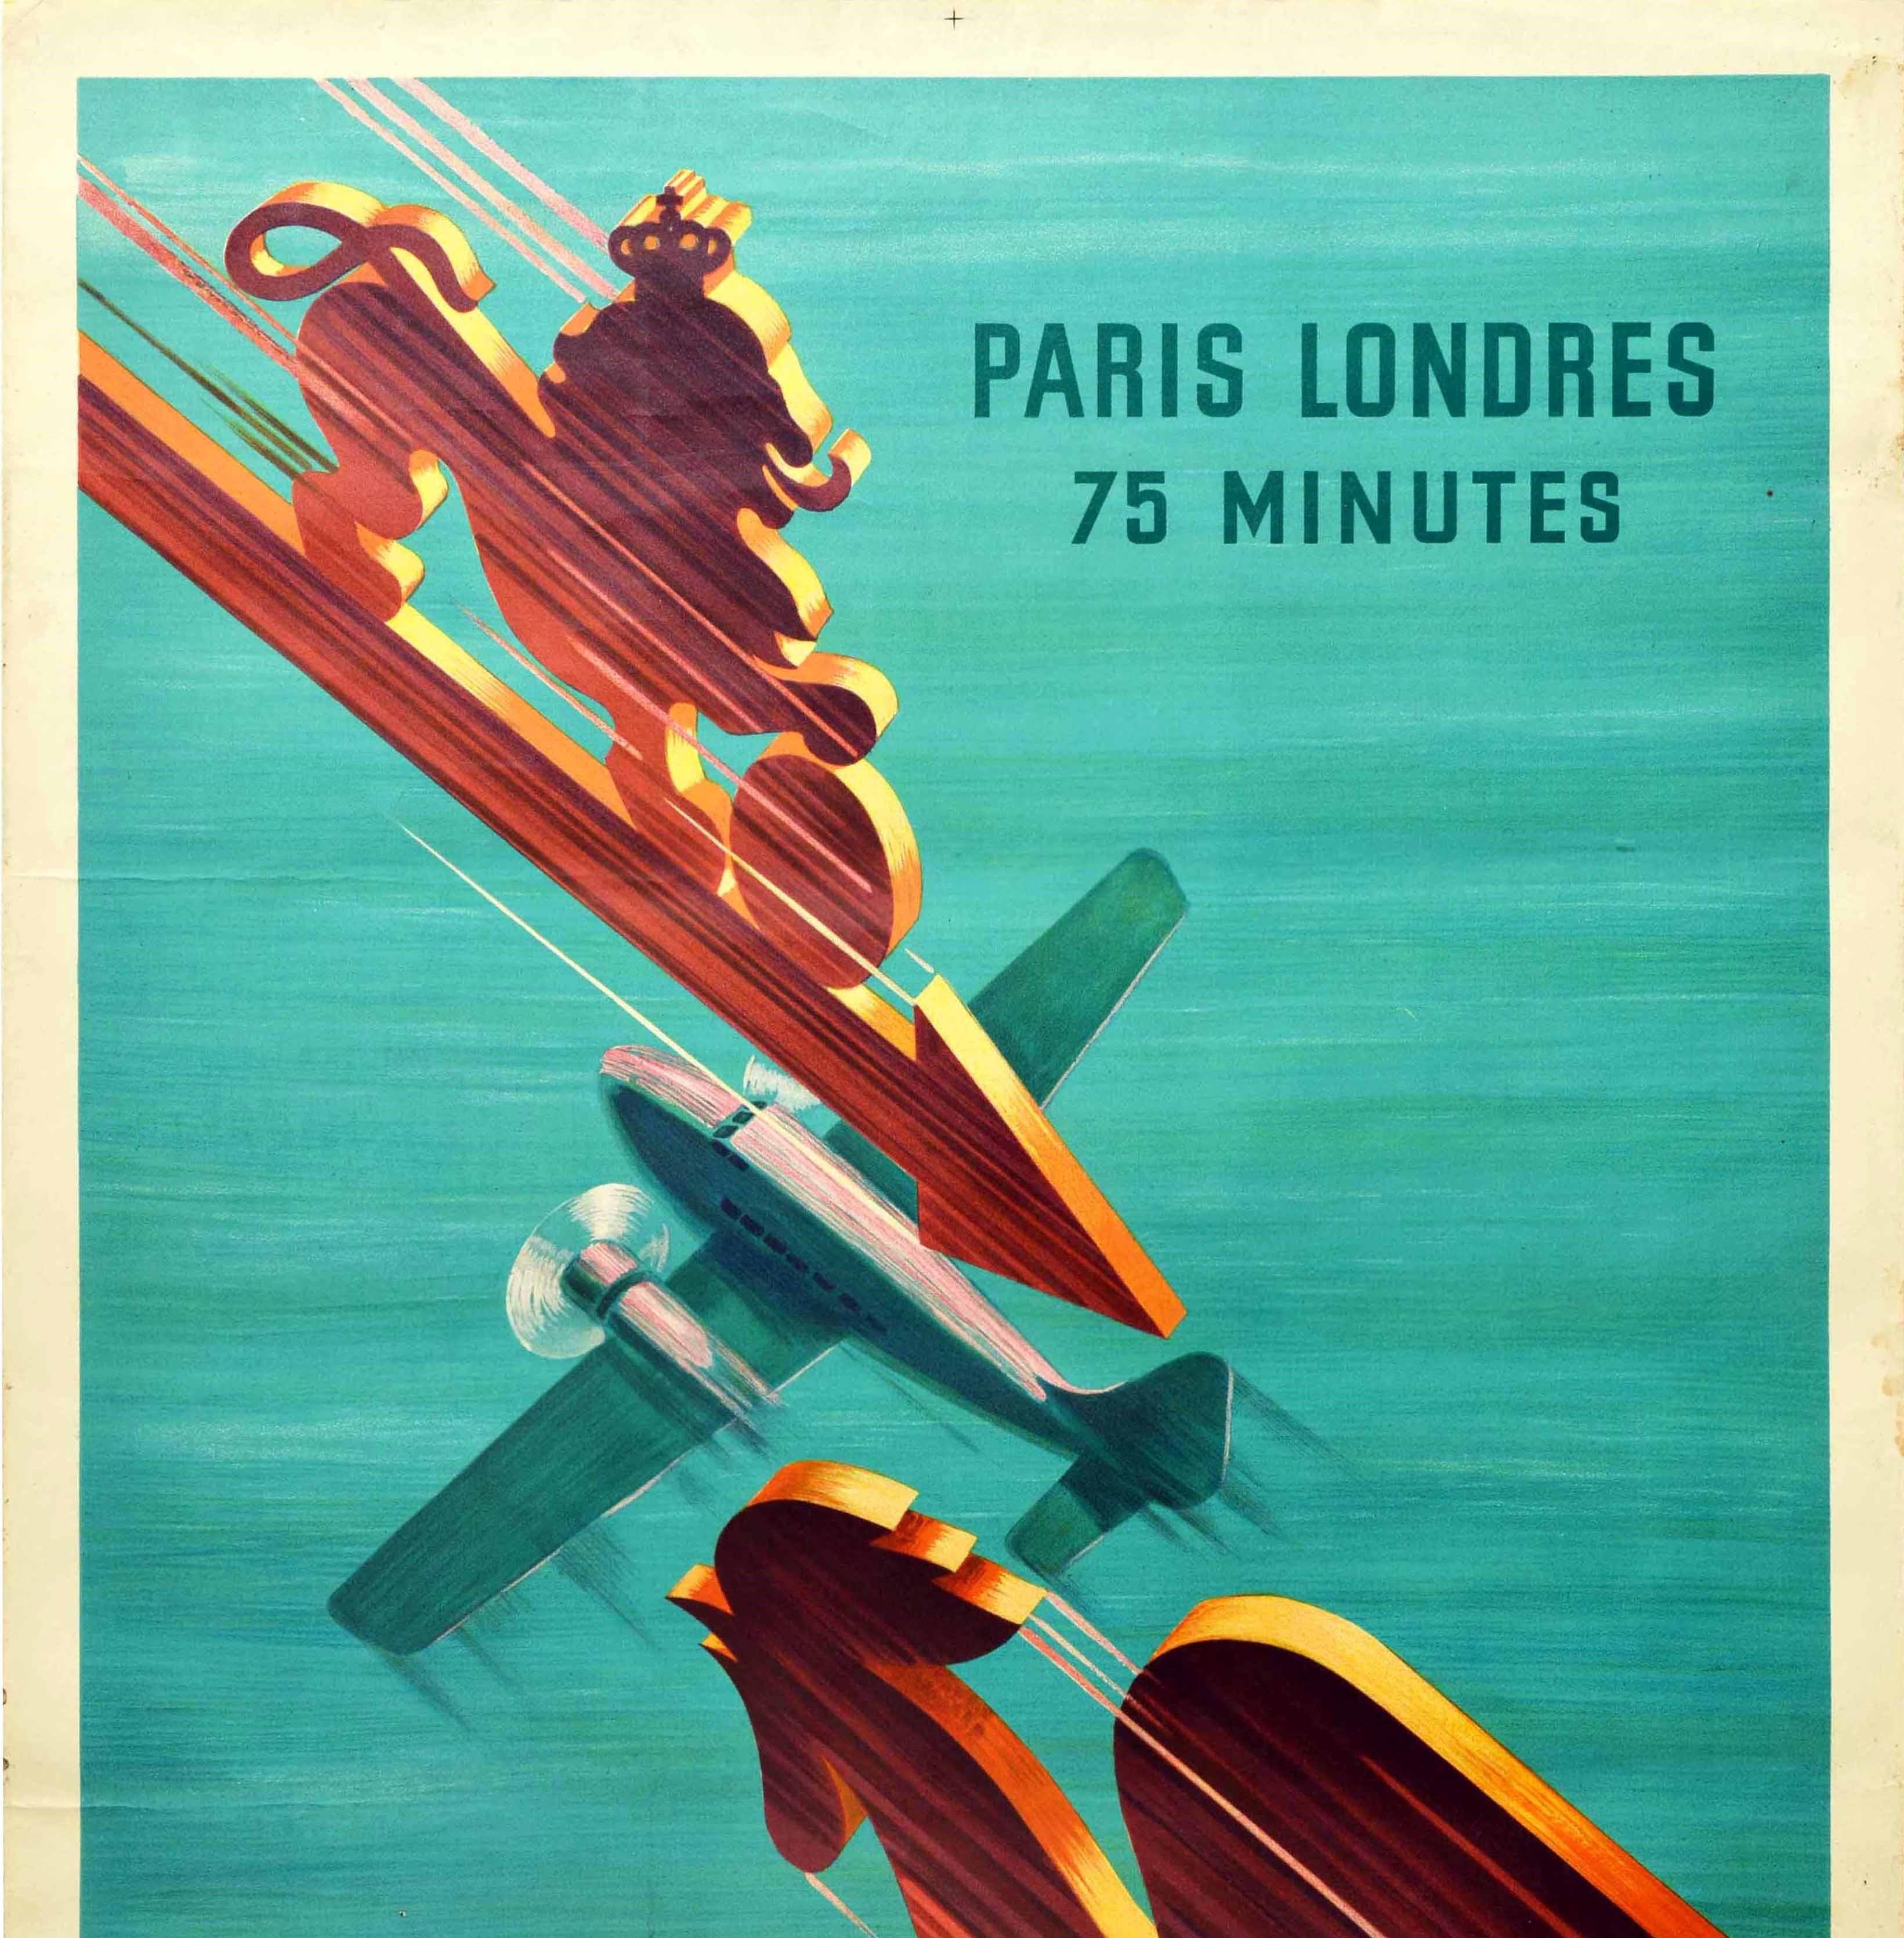 Original vintage travel poster issued by Air France - Paris Londres 75 minutes / Paris London 75 minutes. Dynamic design by Roger de Valerio (1886-1951) featuring a golden lion and rooster on arrows pointing forwards representing the national